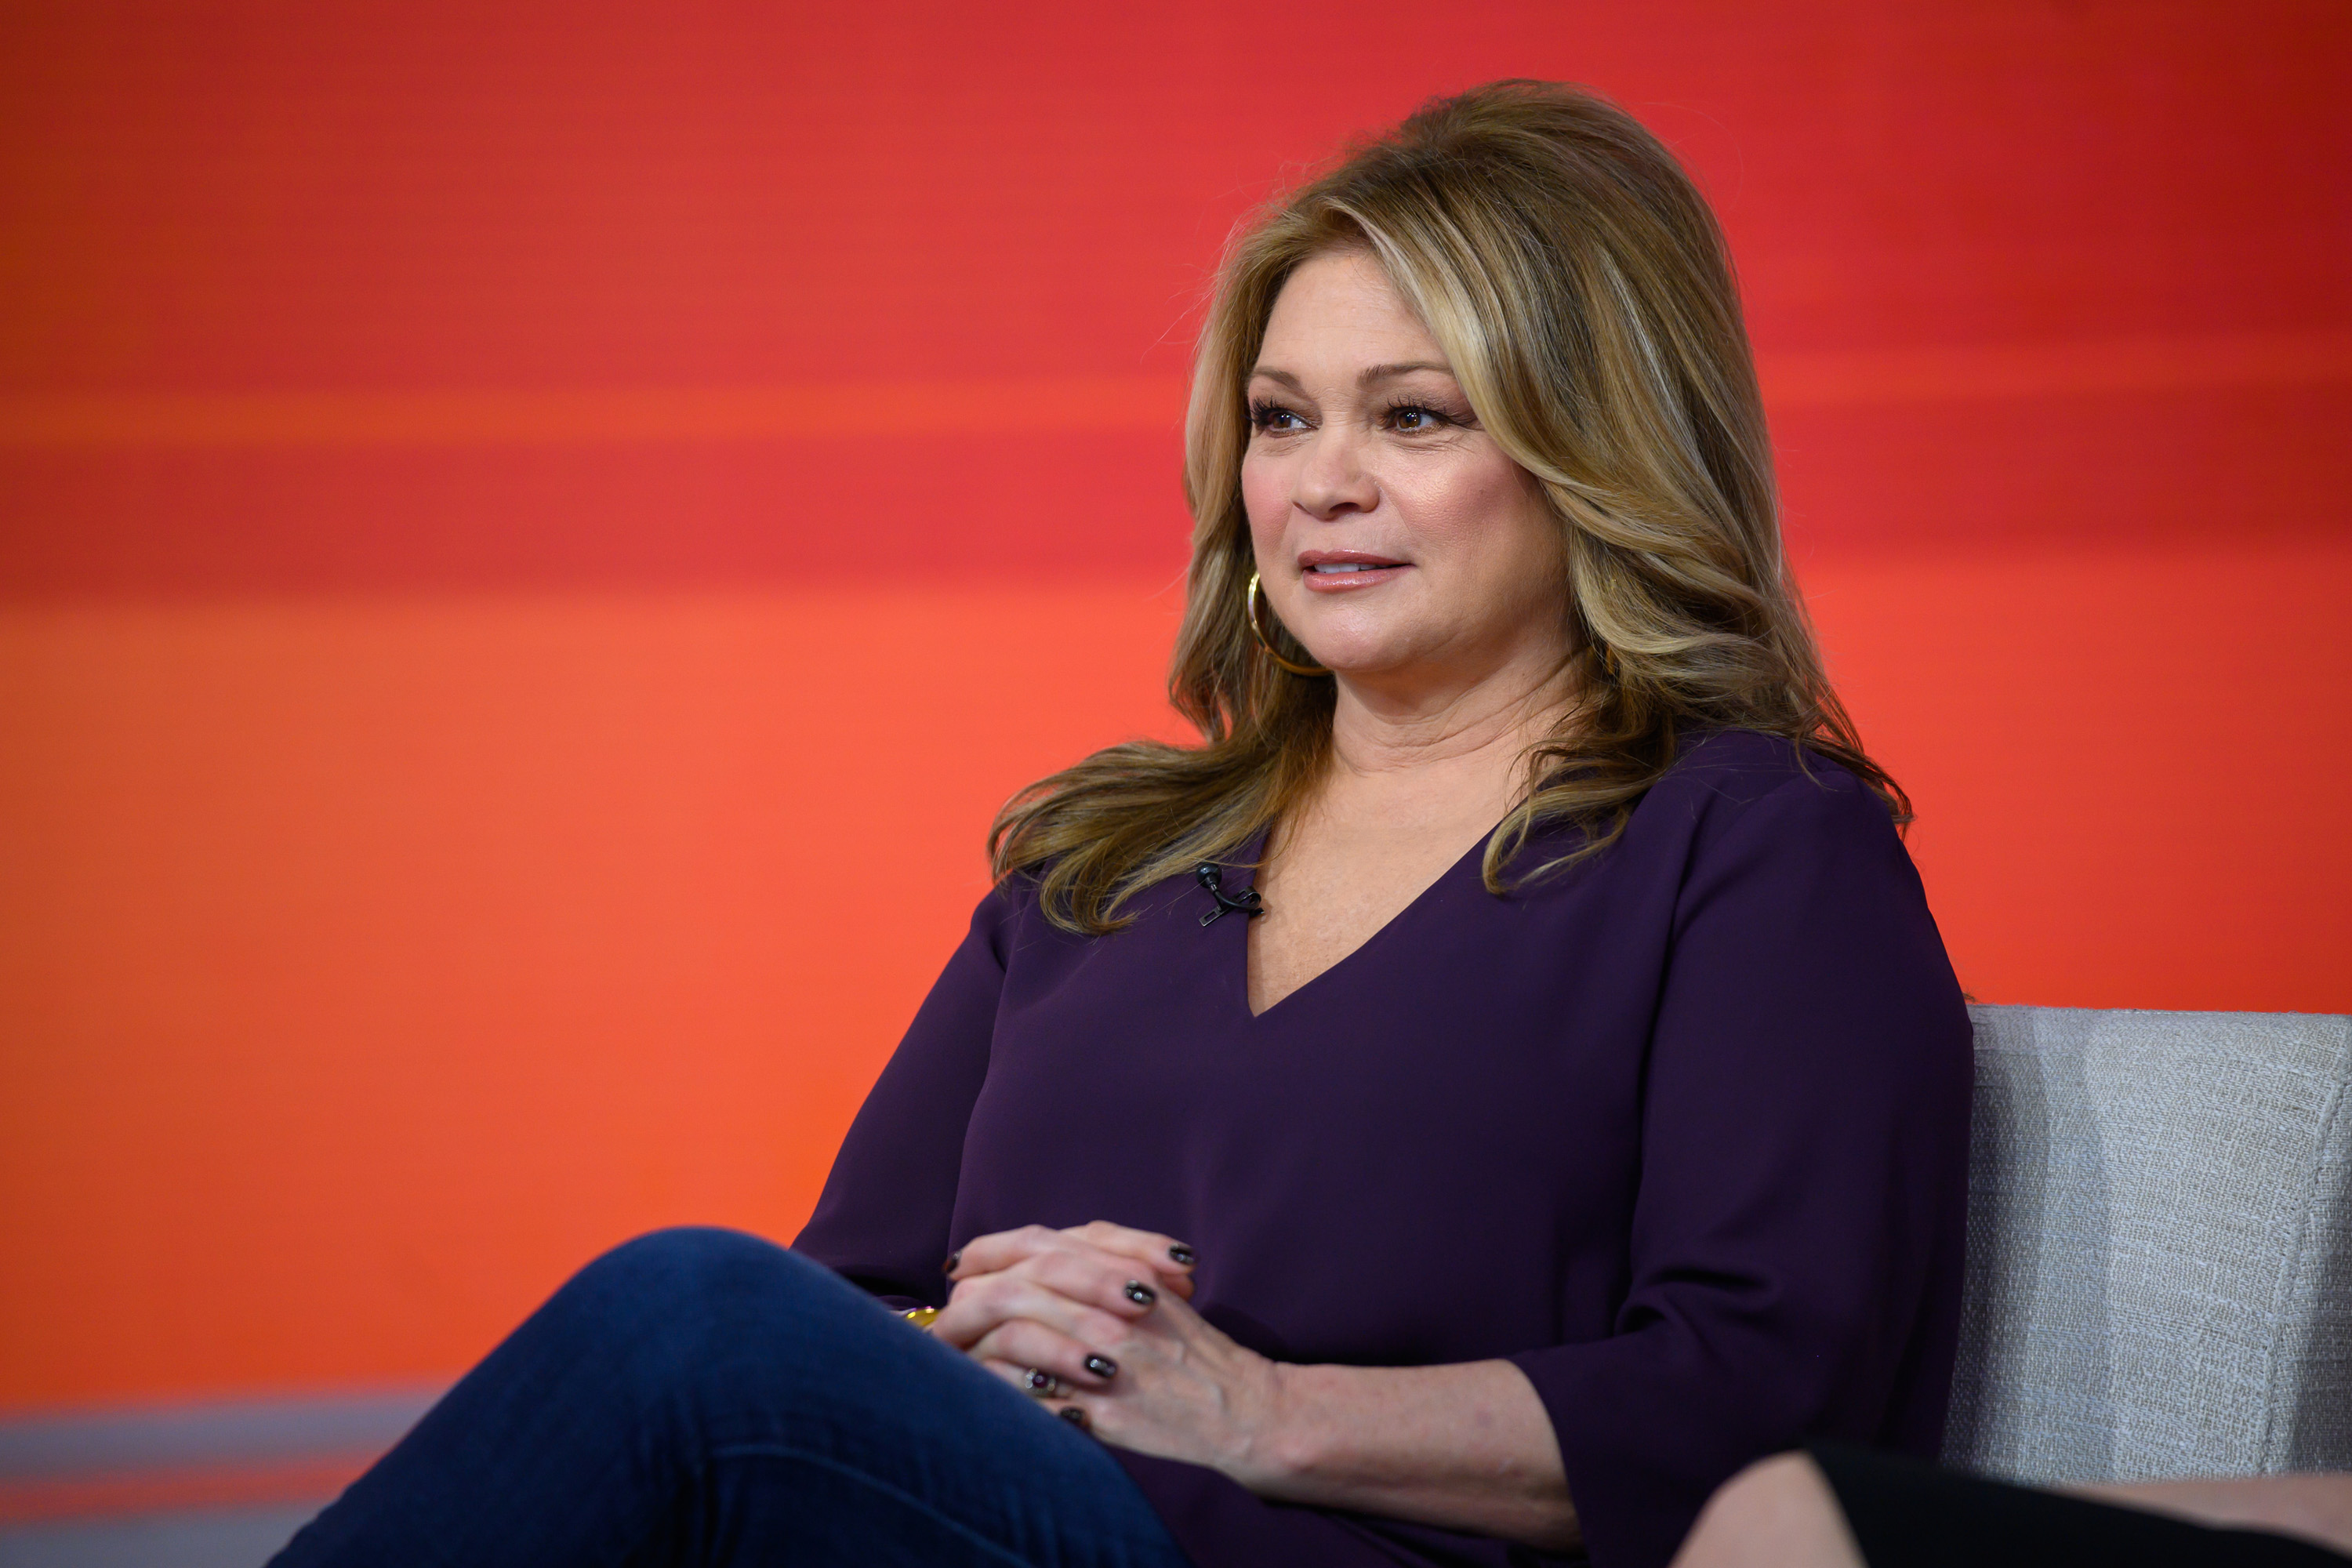 Valerie Bertinelli on the "Today" show, January 24, 2020. | Source: Getty Images